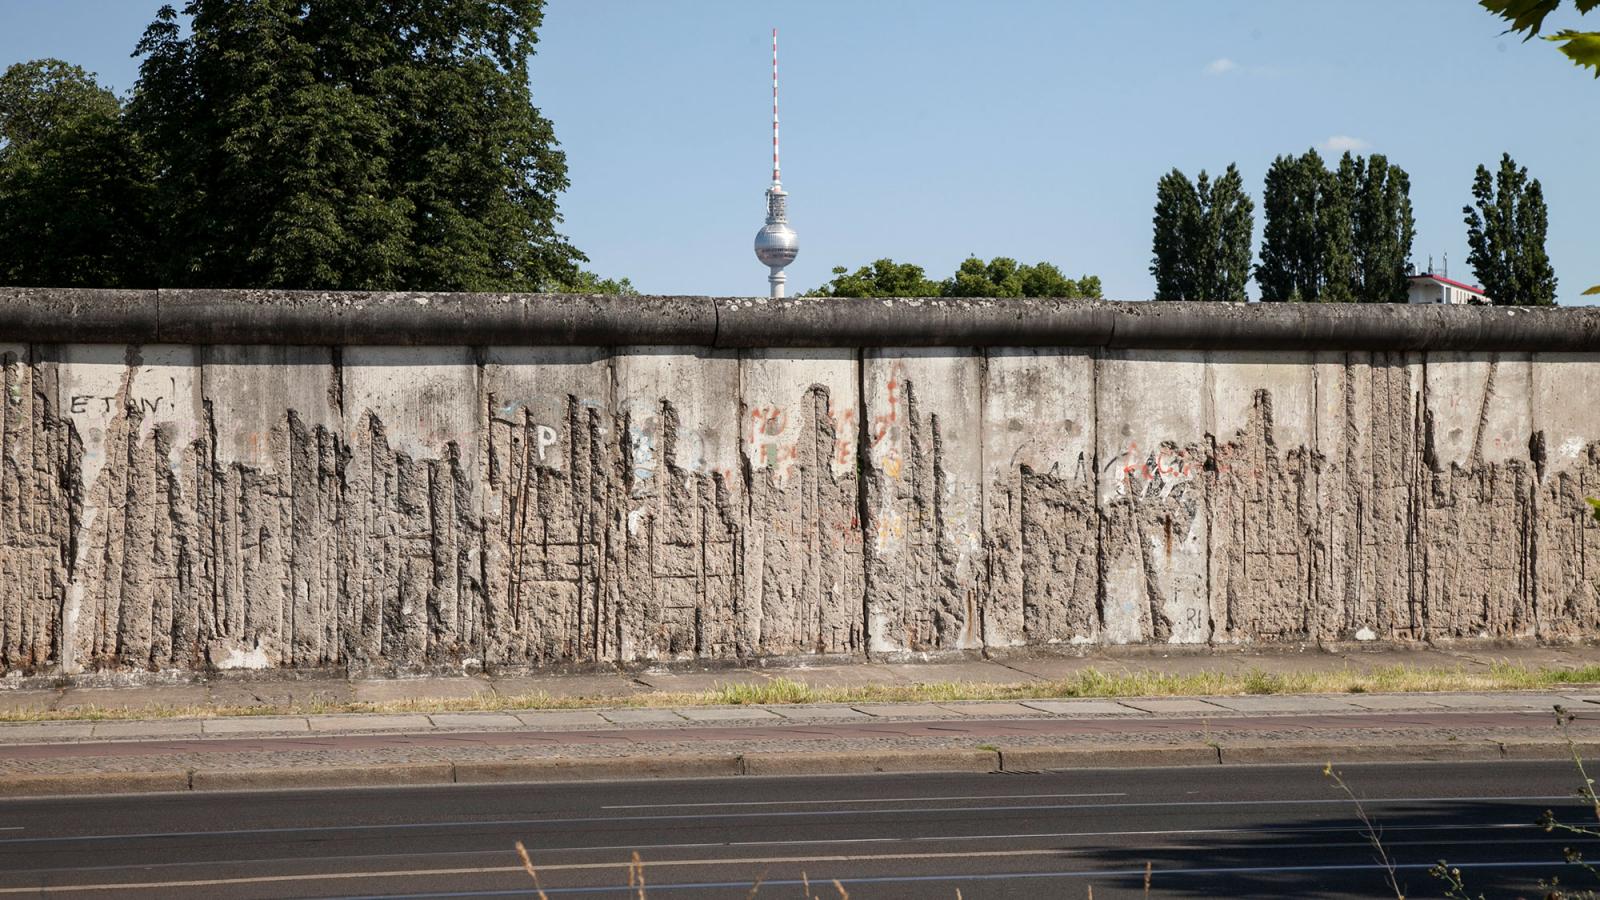 The Wall at Bernauer Strasse